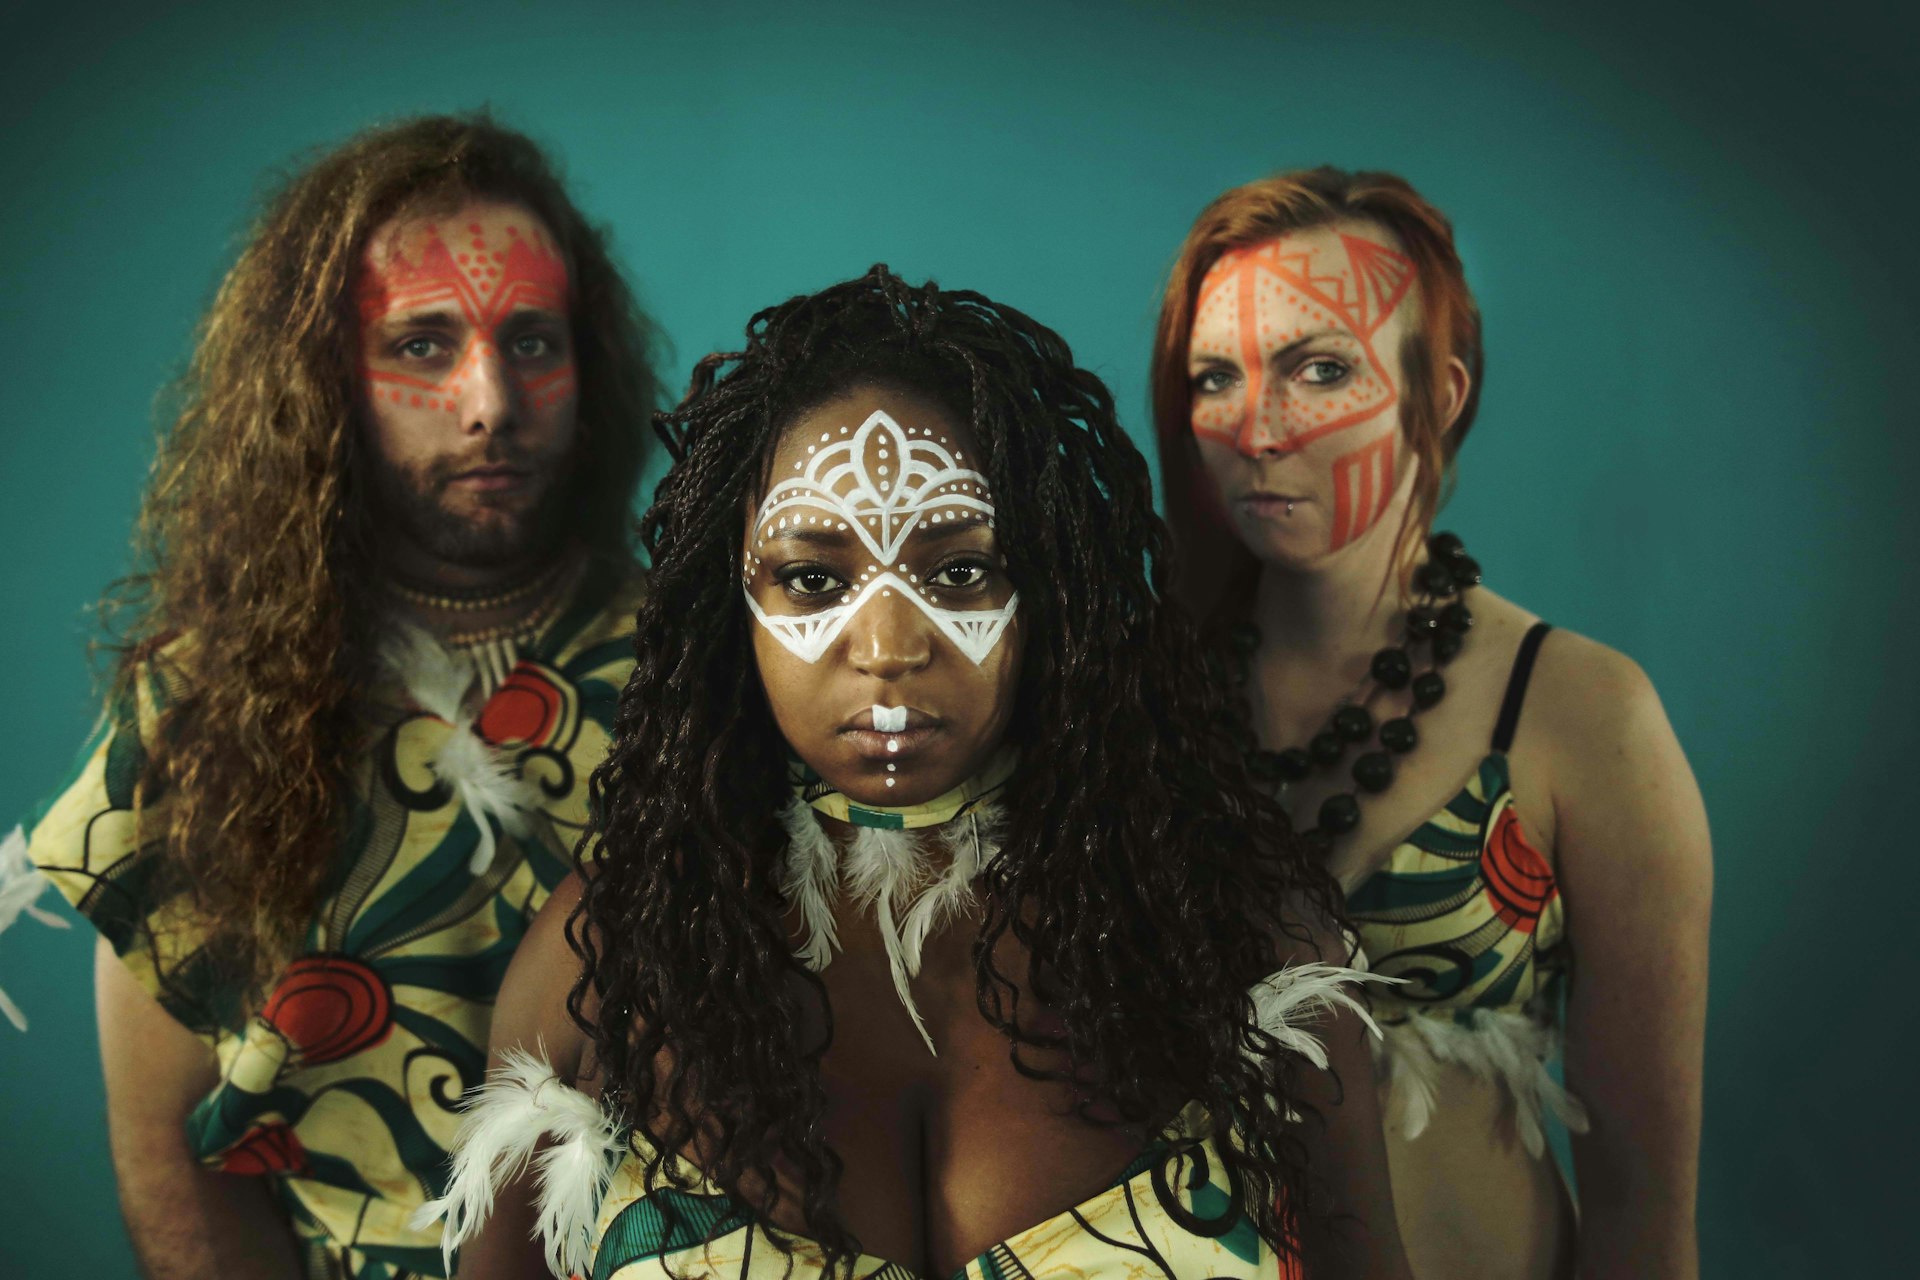 Vodun are about to unleash the spirits at Afropunk London